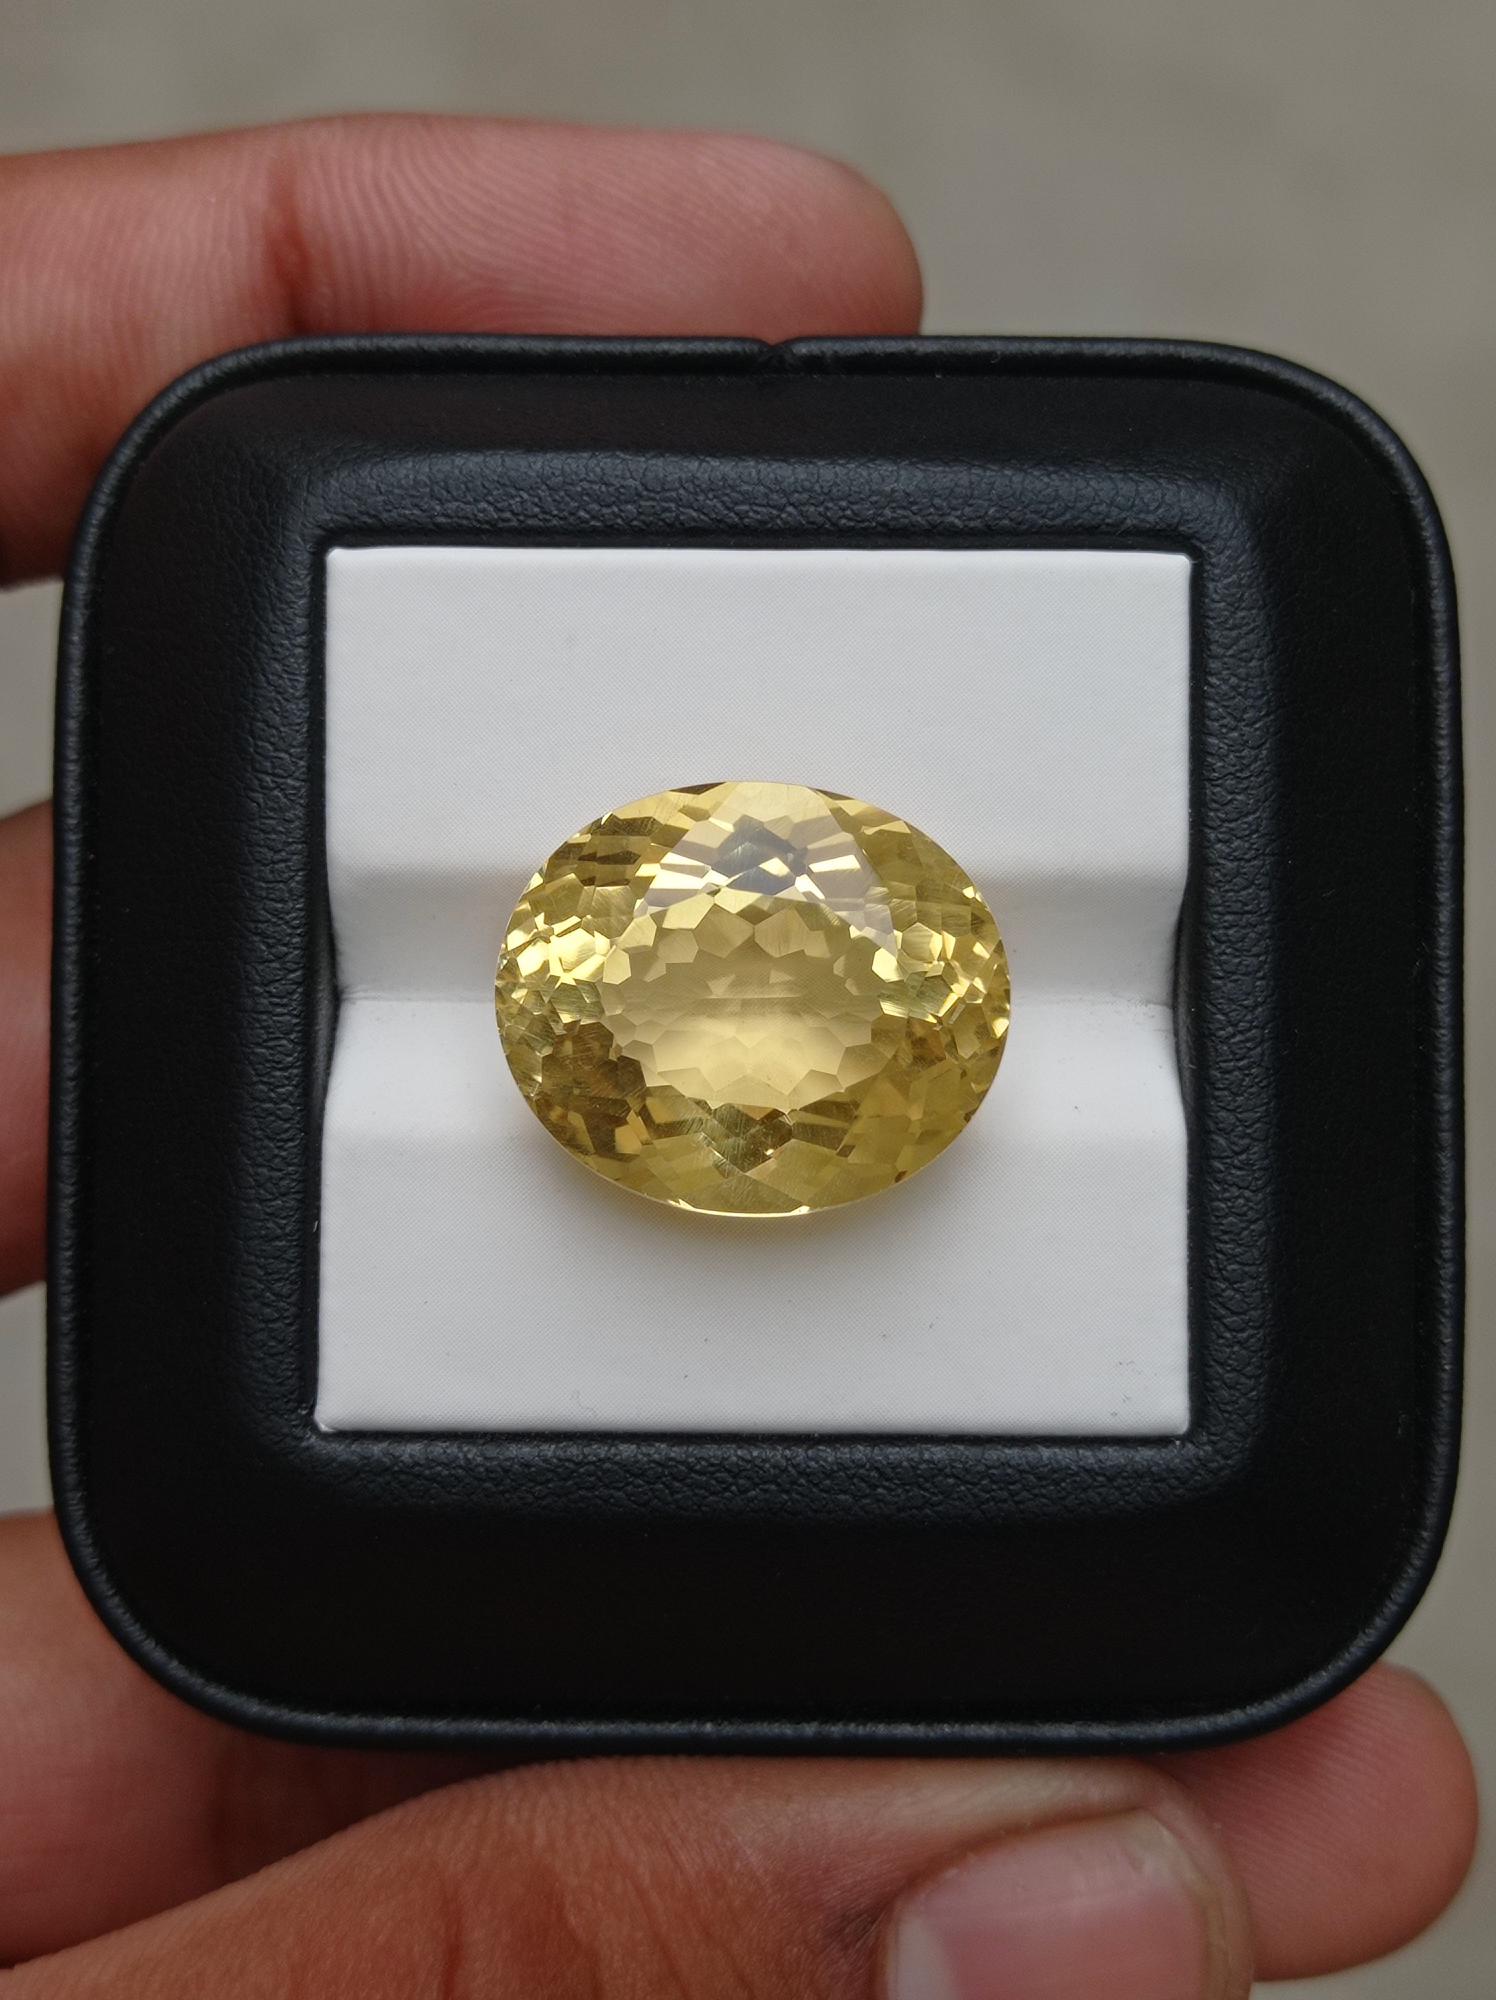 20.1ct Transparent Oval Faceted Citrine For Sale - November Birthstone - 19x16.5x11mm